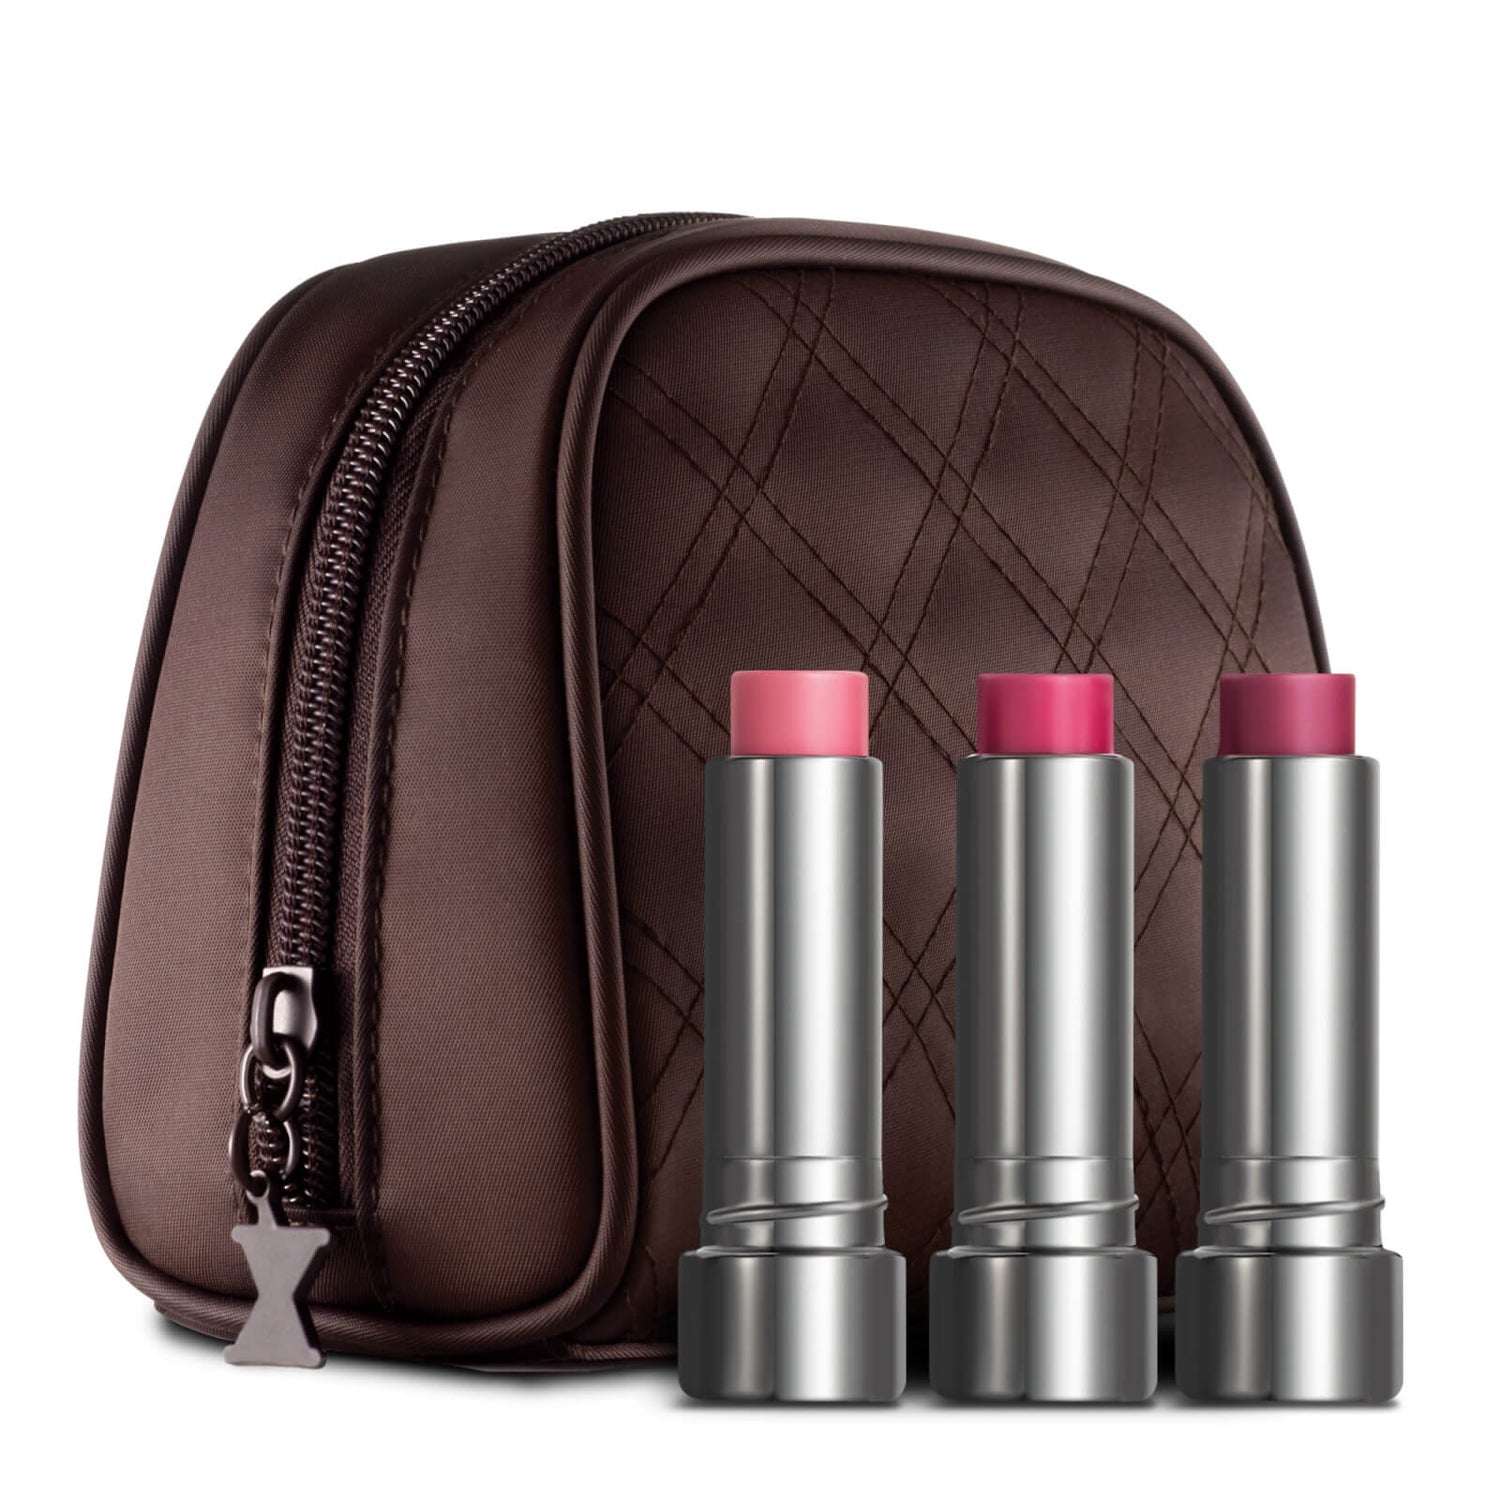 Perricone MD Lipstick Trio with Brown Bag